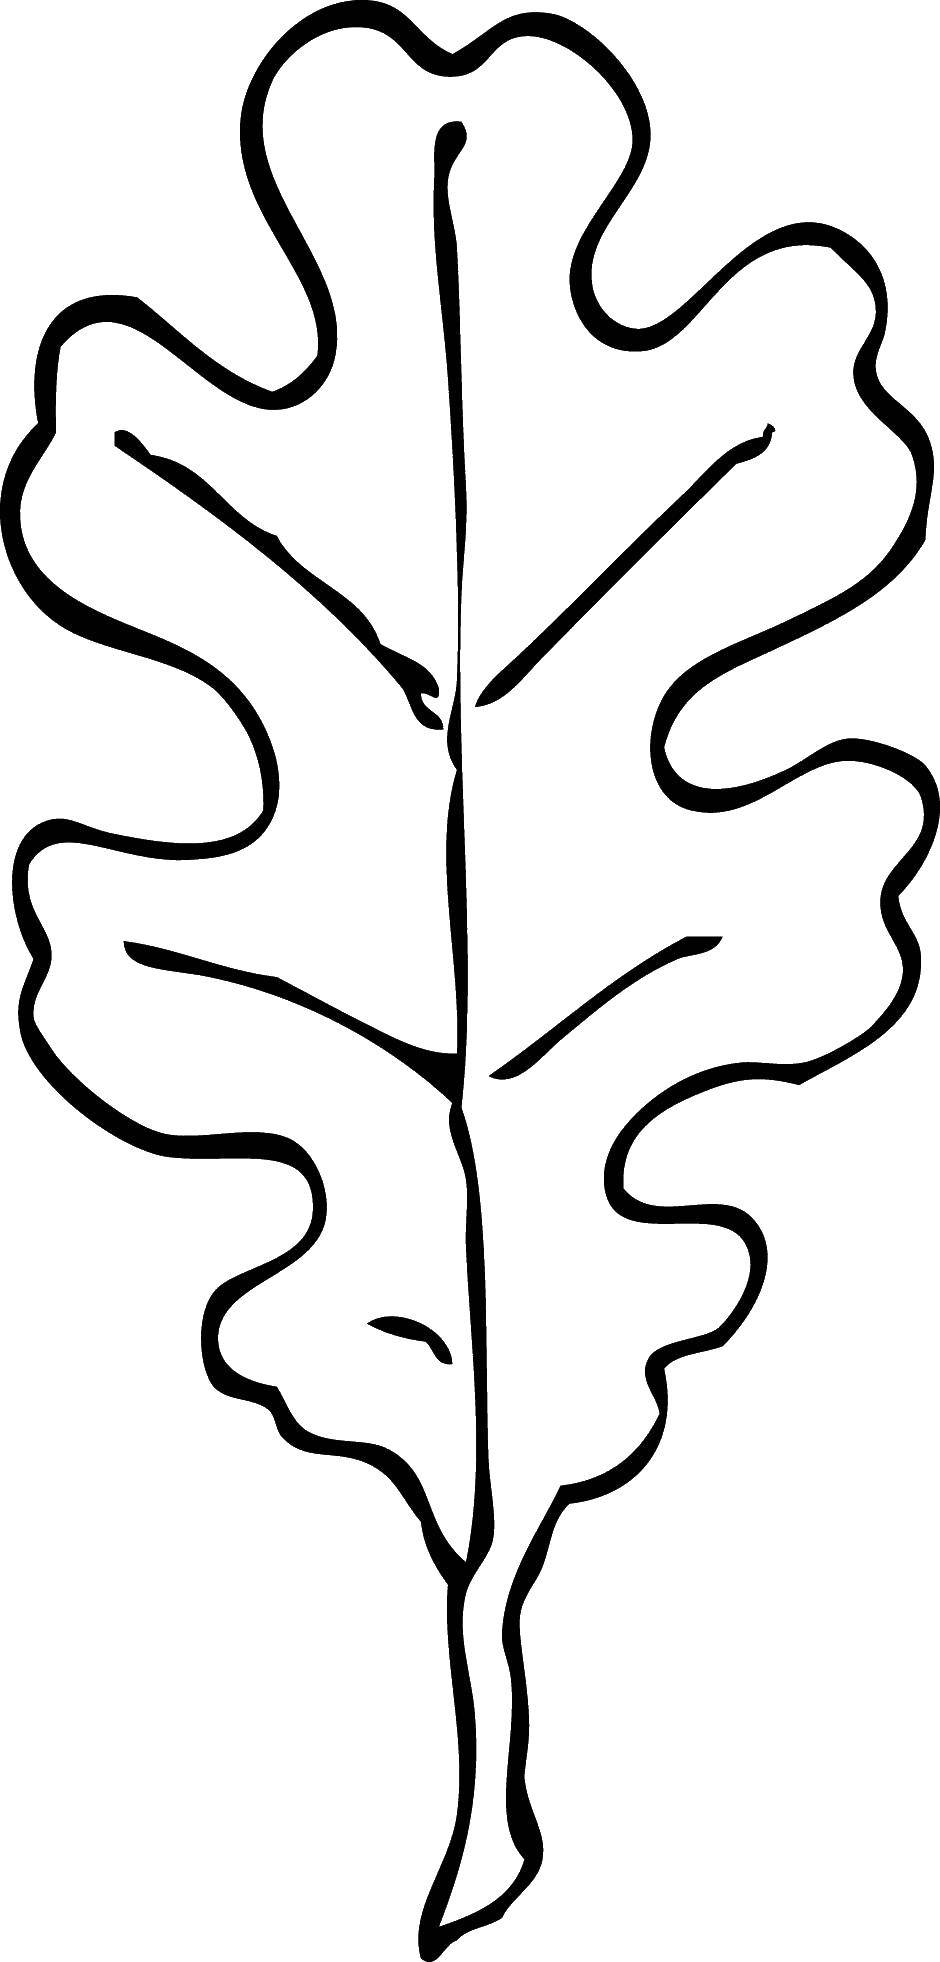 Coloring The leaf fell from the oak. Category The contours of the leaves. Tags:  Leaves, tree.